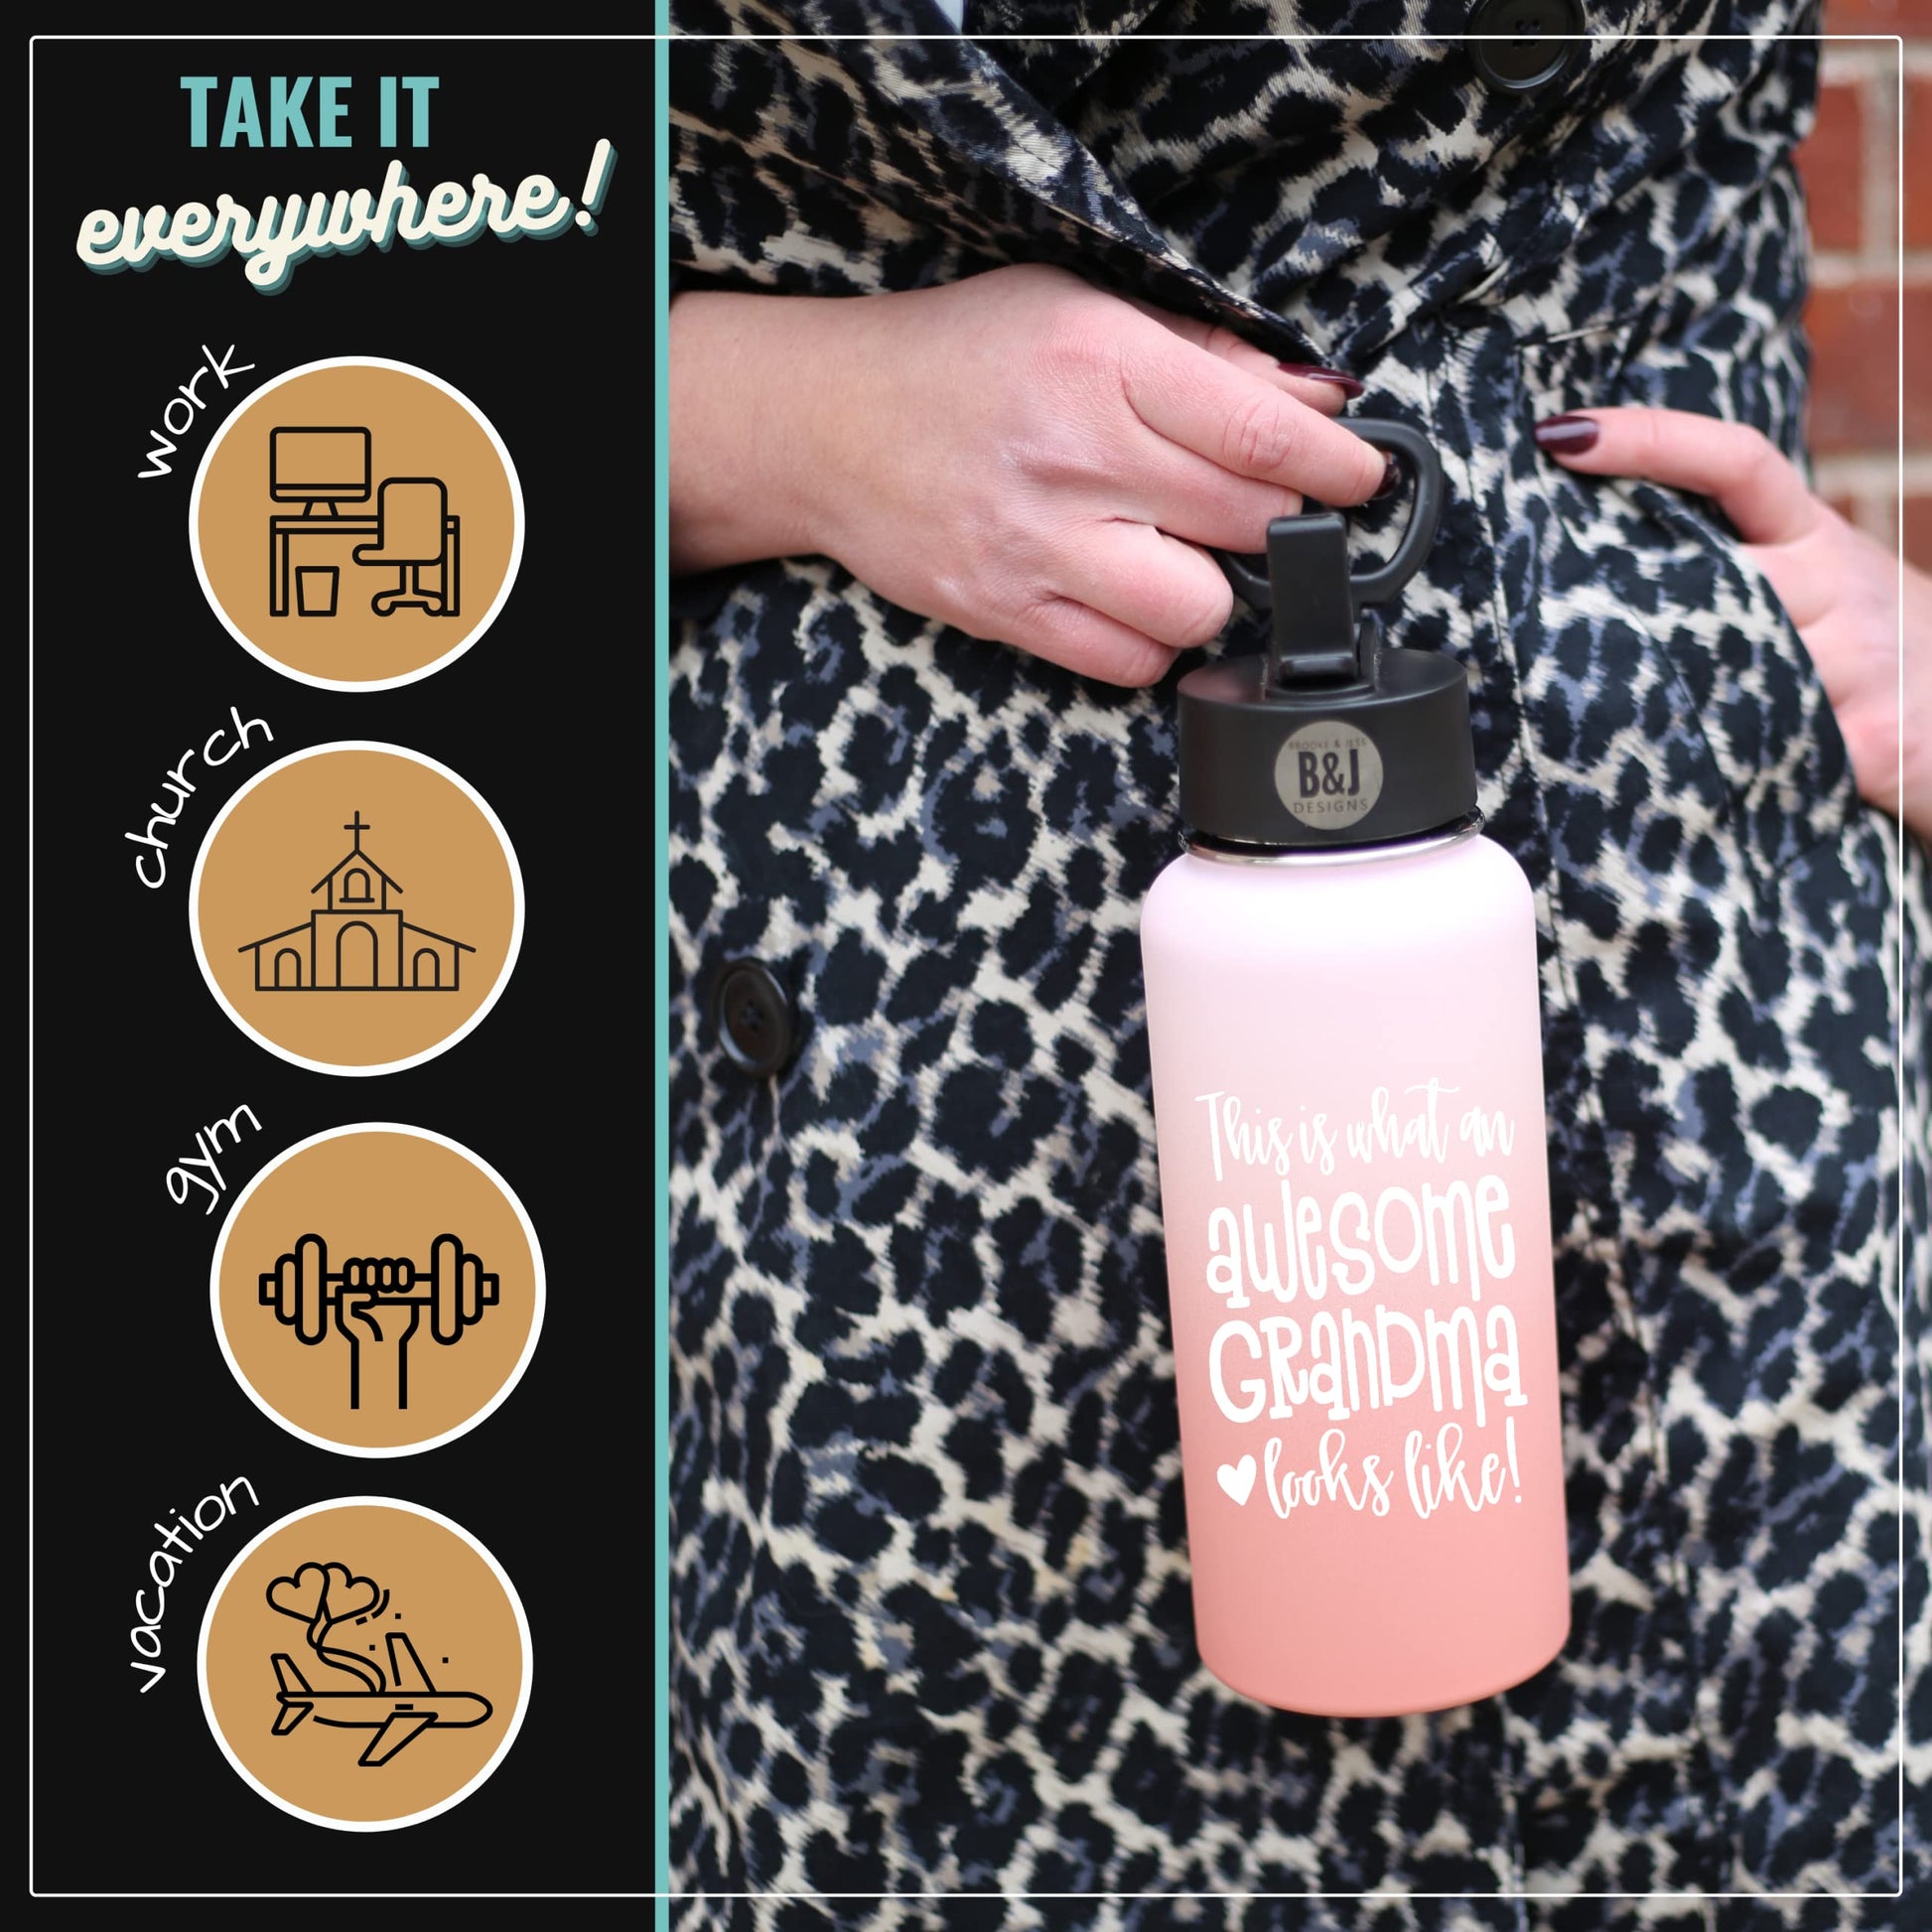 Mama Bear 32 oz Rose Gold Water Bottle for Moms – Brooke & Jess Designs - 2  Sisters Helping You Celebrate Your Favorite People